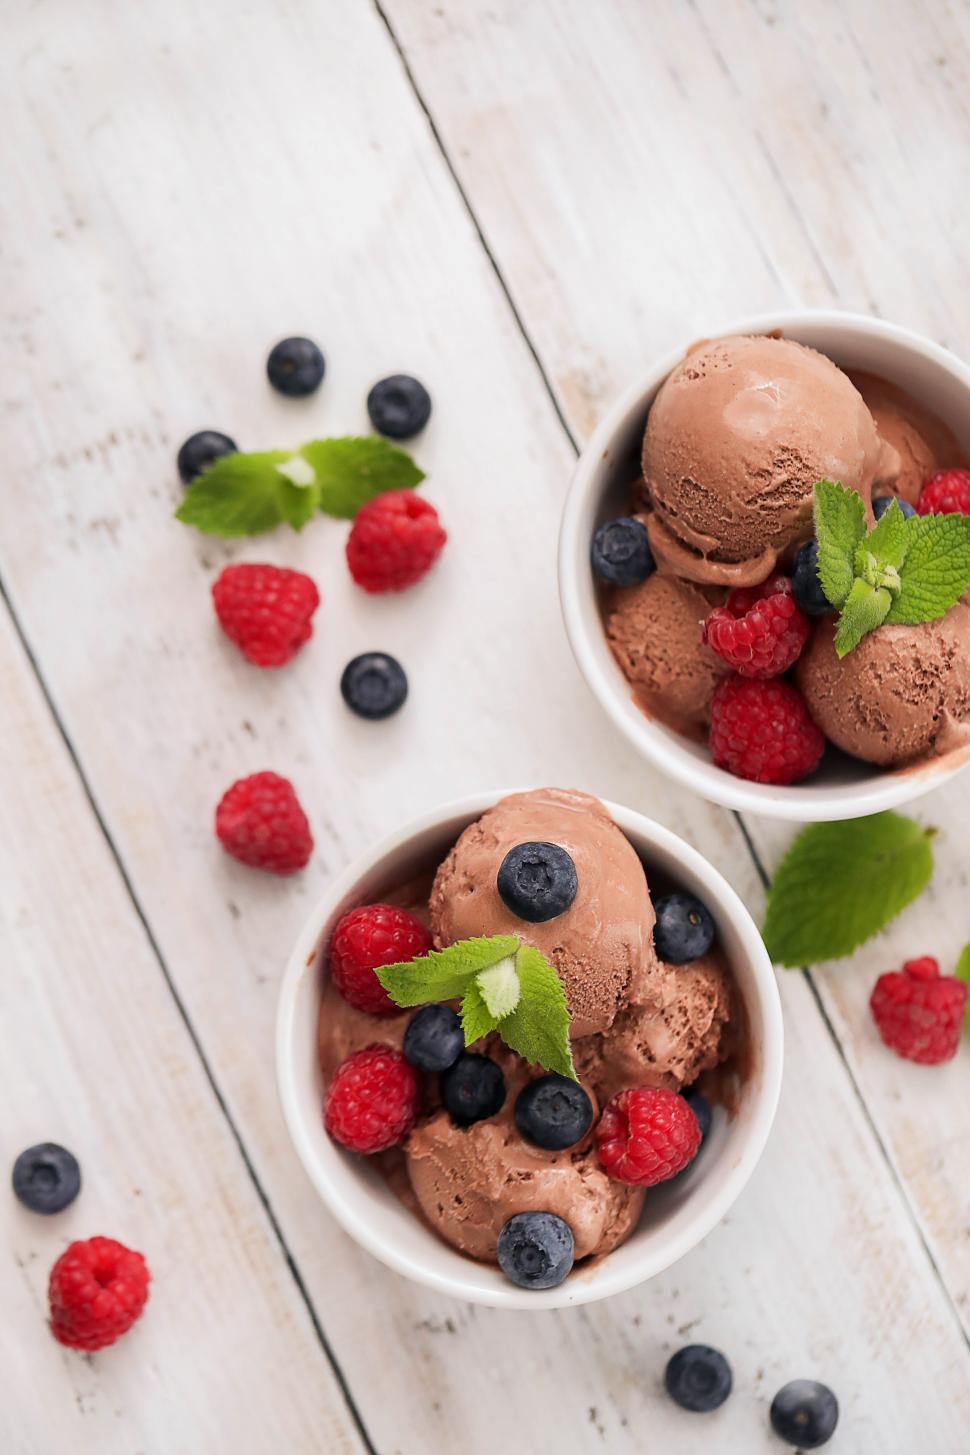 Free Image of Bowls of Ice cream and fruit 